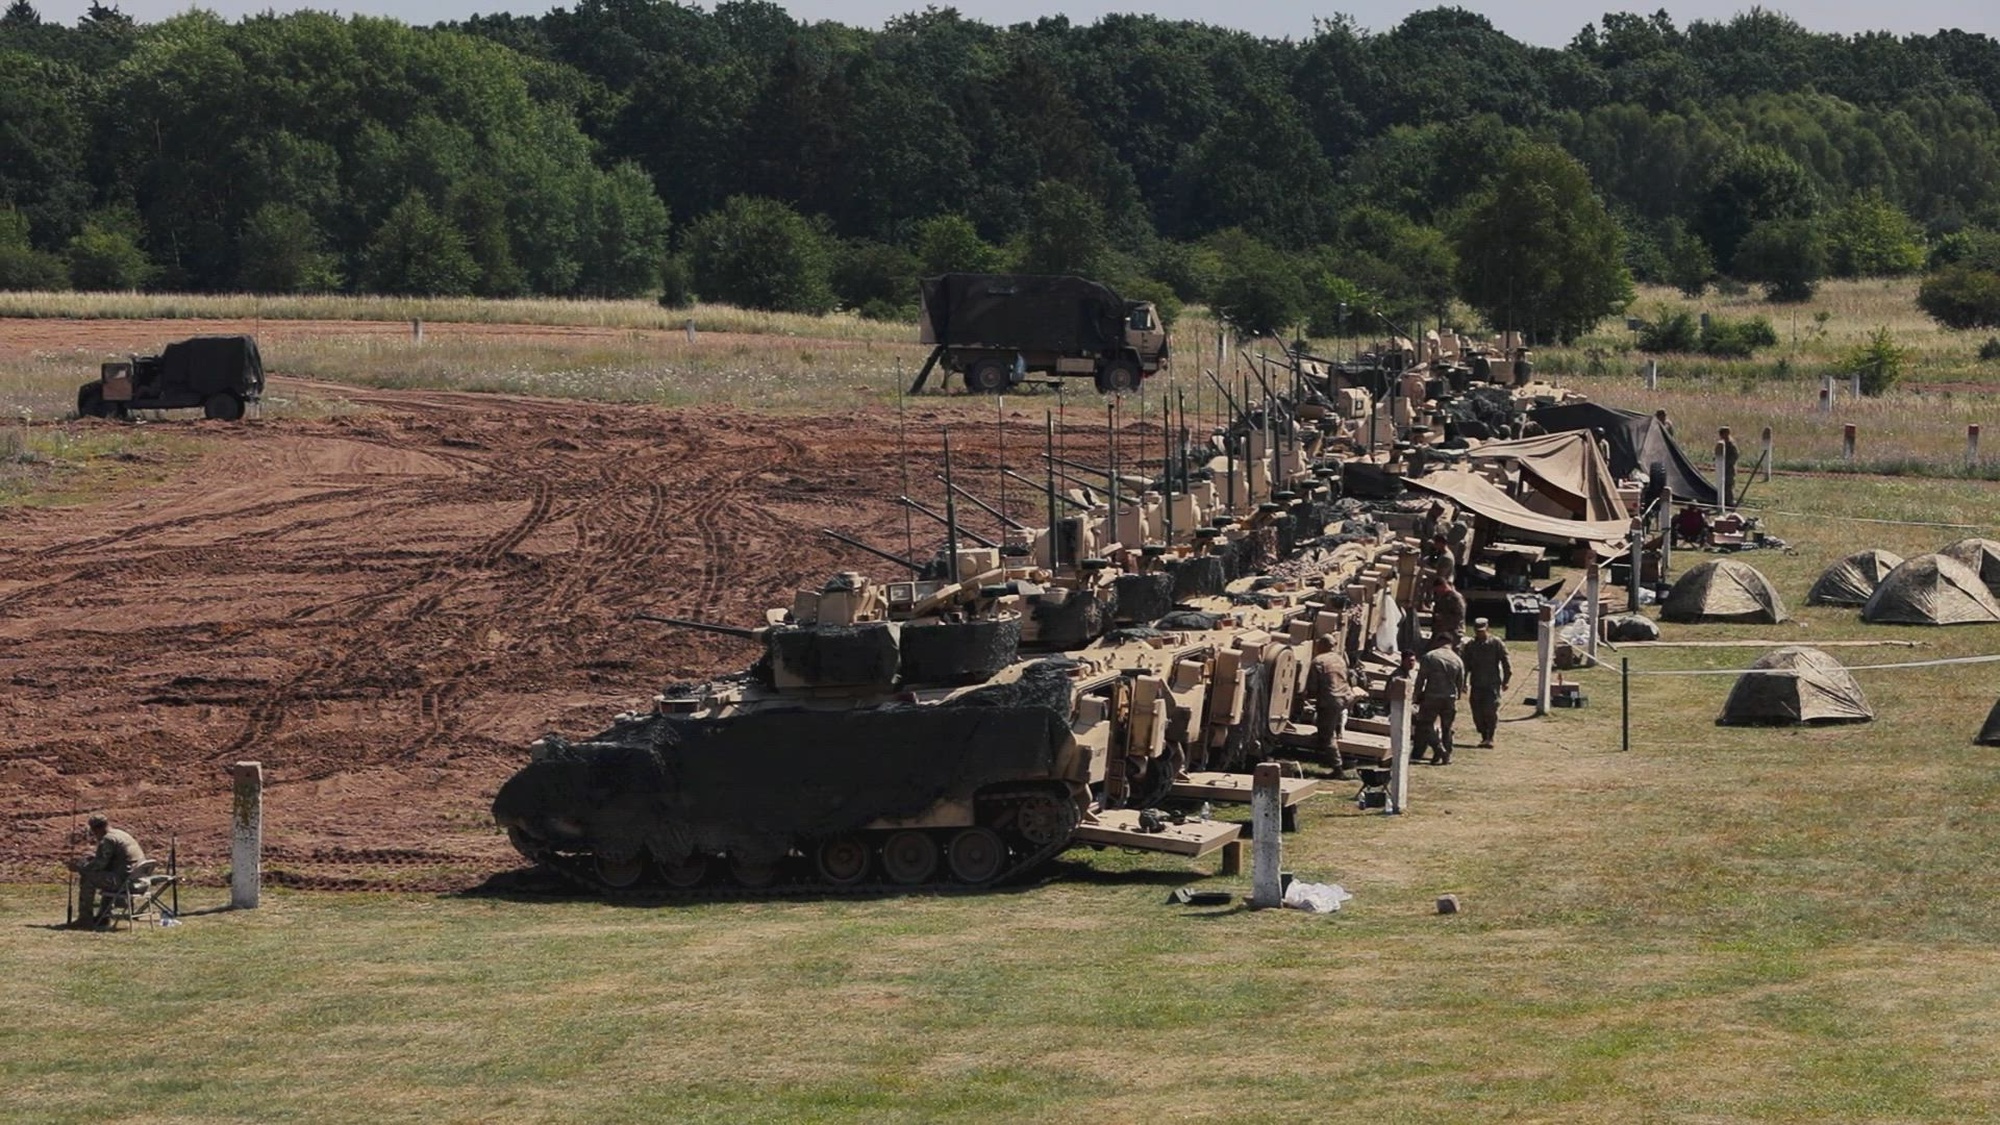 U.S. Soldiers assigned to Chaos Company, 1st Battalion, 68th Armor Regiment, 3rd Armored Brigade Combat Team, 4th Infantry Division, conduct an M2A3 Bradley Fighting Vehicle gunnery table VI at Drawsko Pomorskie, Poland, July 27, 2022. The 3rd Armored Brigade Combat Team, 4th Infantry Division, is among other units assigned to 1st Infantry Division, proudly working alongside NATO allies and regional security partners to provide combat-credible forces to V Corps, America’s forward-deployed corps in Europe. (U.S. Army National Guard Video by Staff Sgt. Gabriel Rivera)